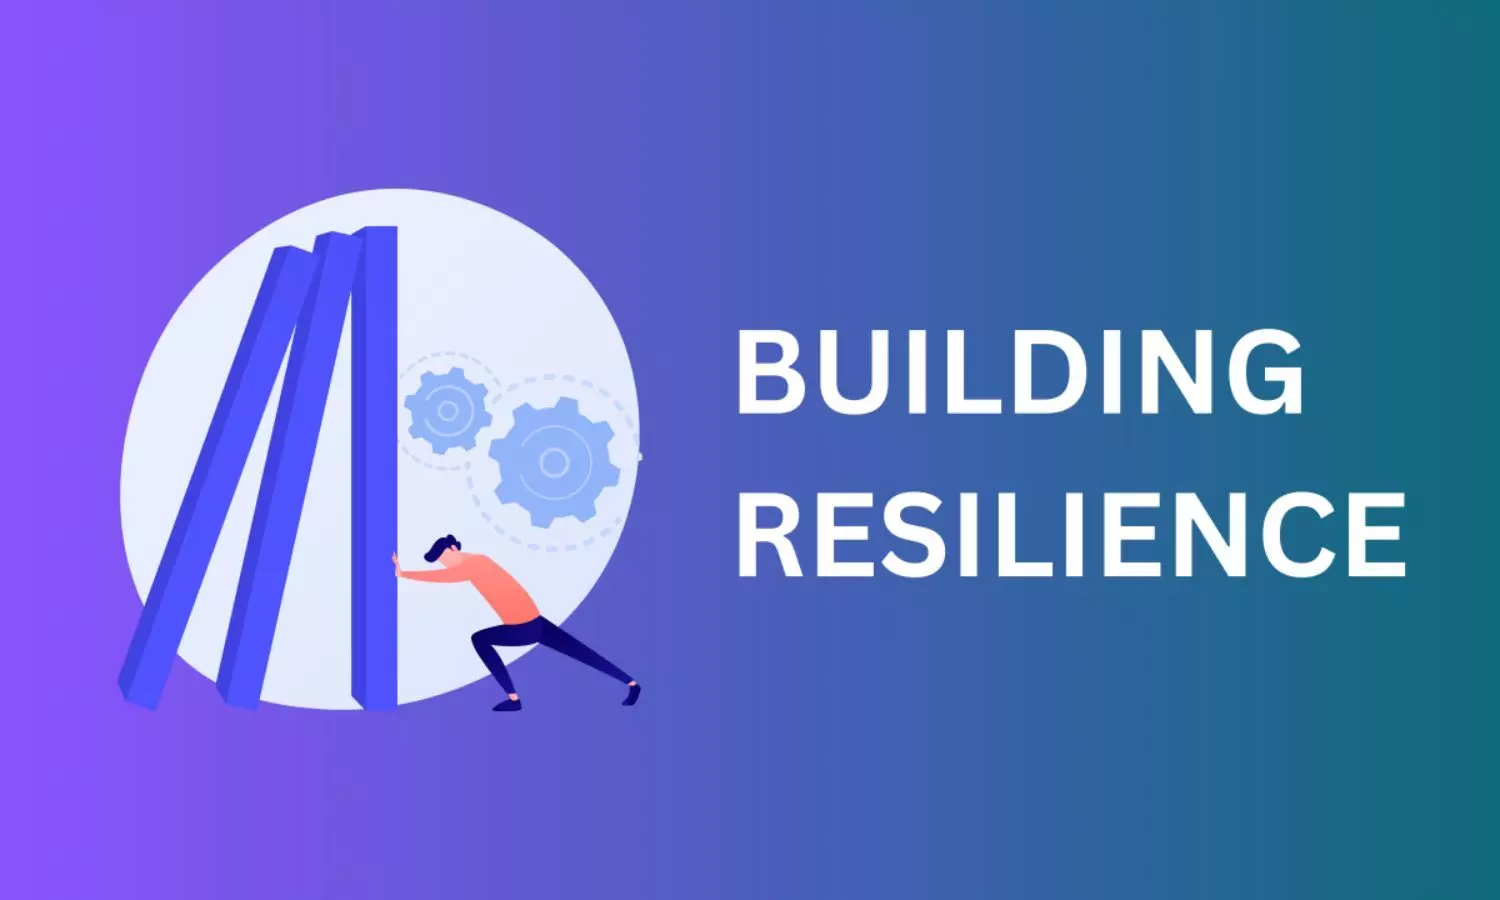 How to Build Resilience in Uncertain Times and Navigate Life’s Challenges?